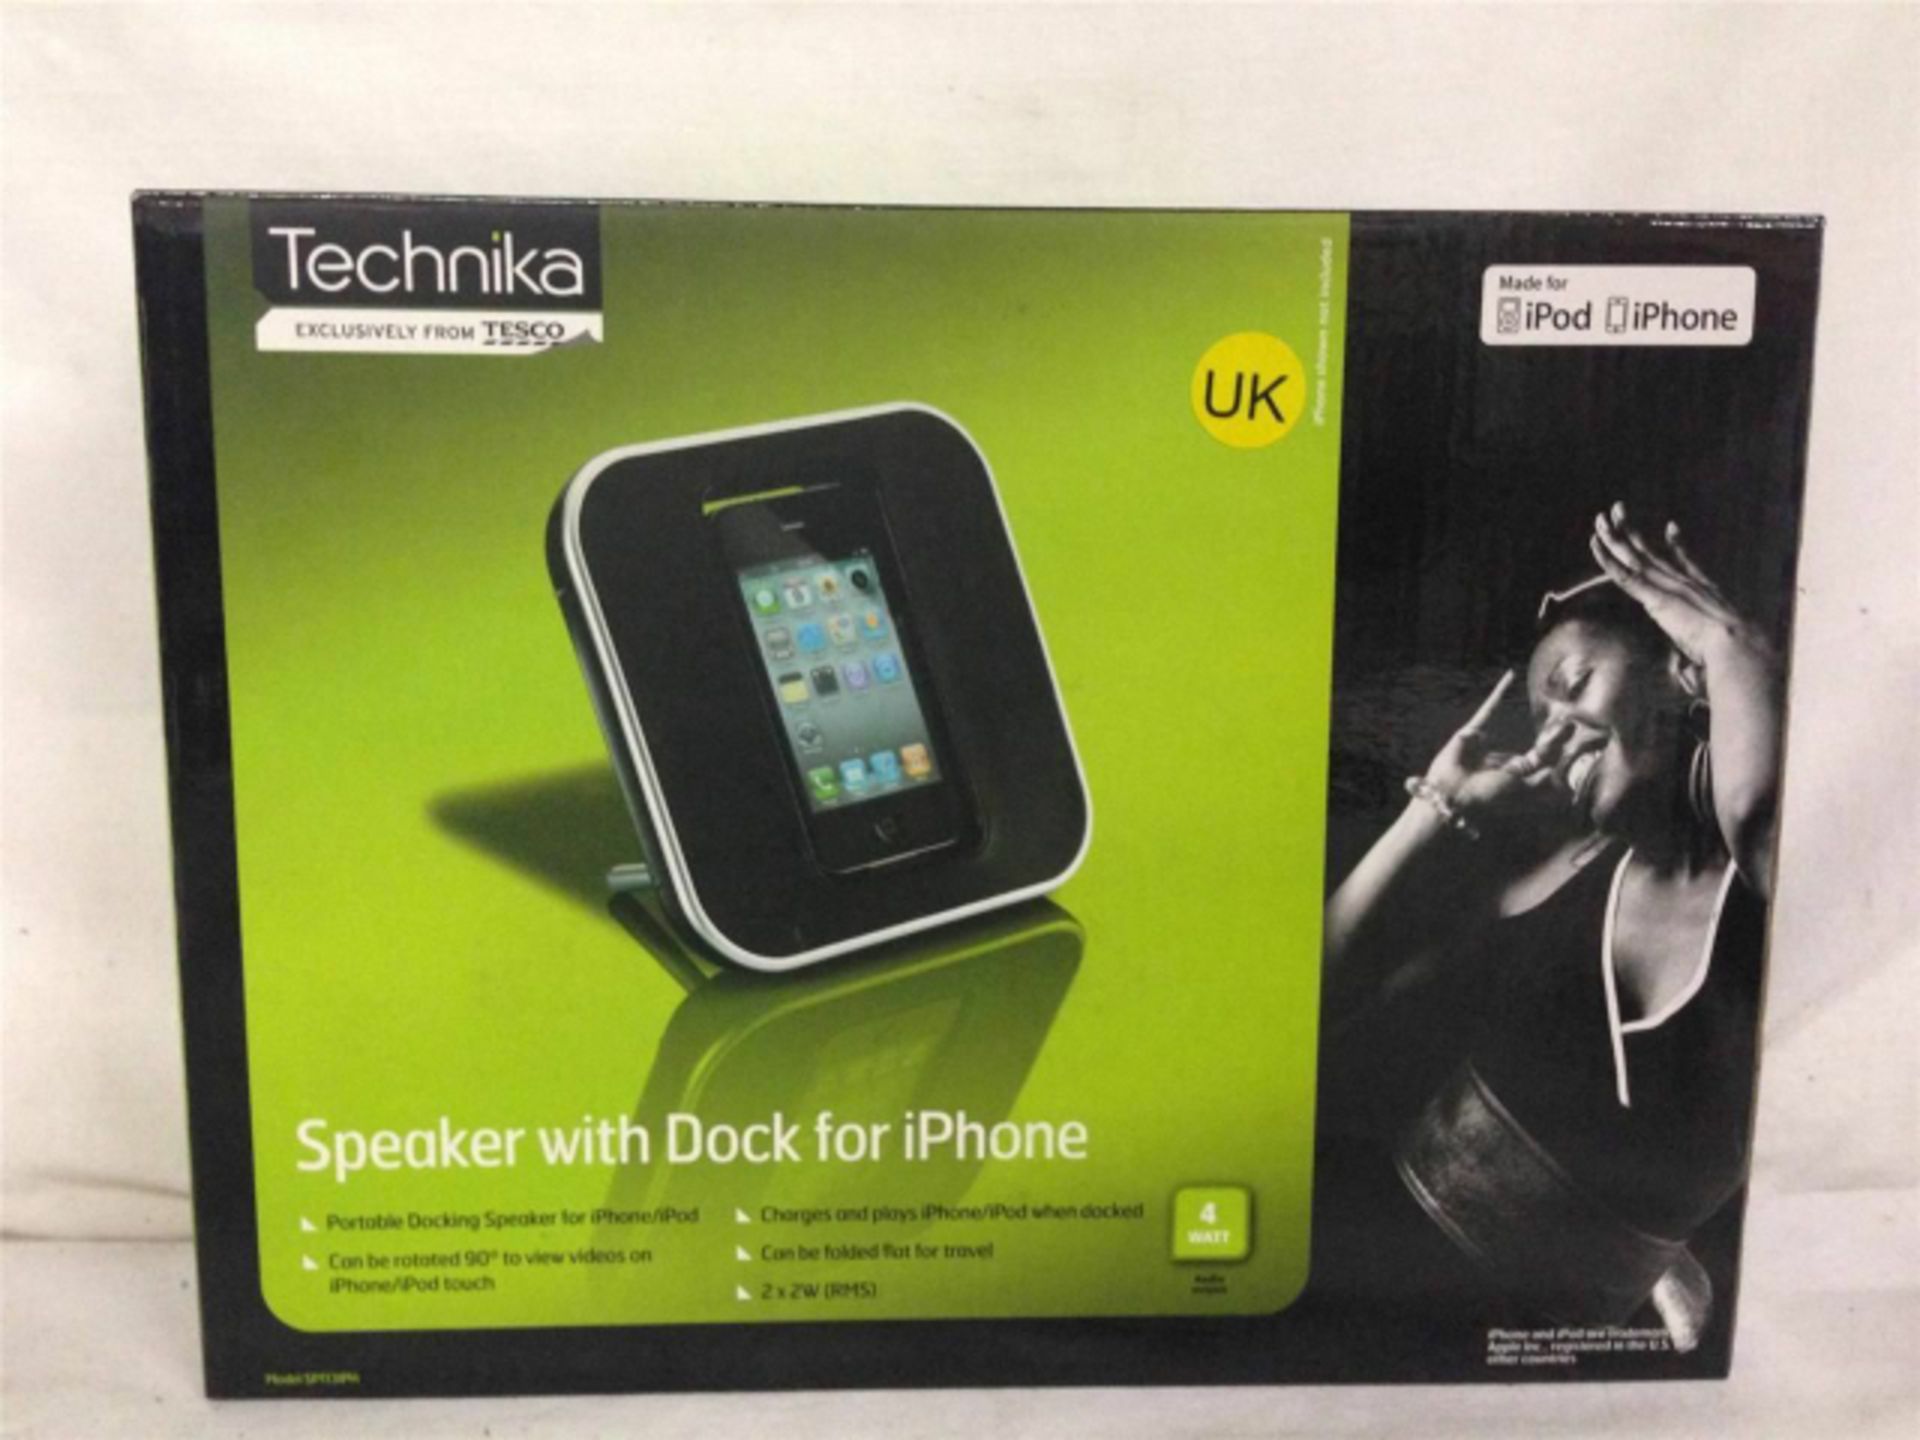 1 x Technika IPhone/IPod speaker with dock. Brand new and boxed. Total RRP £30!